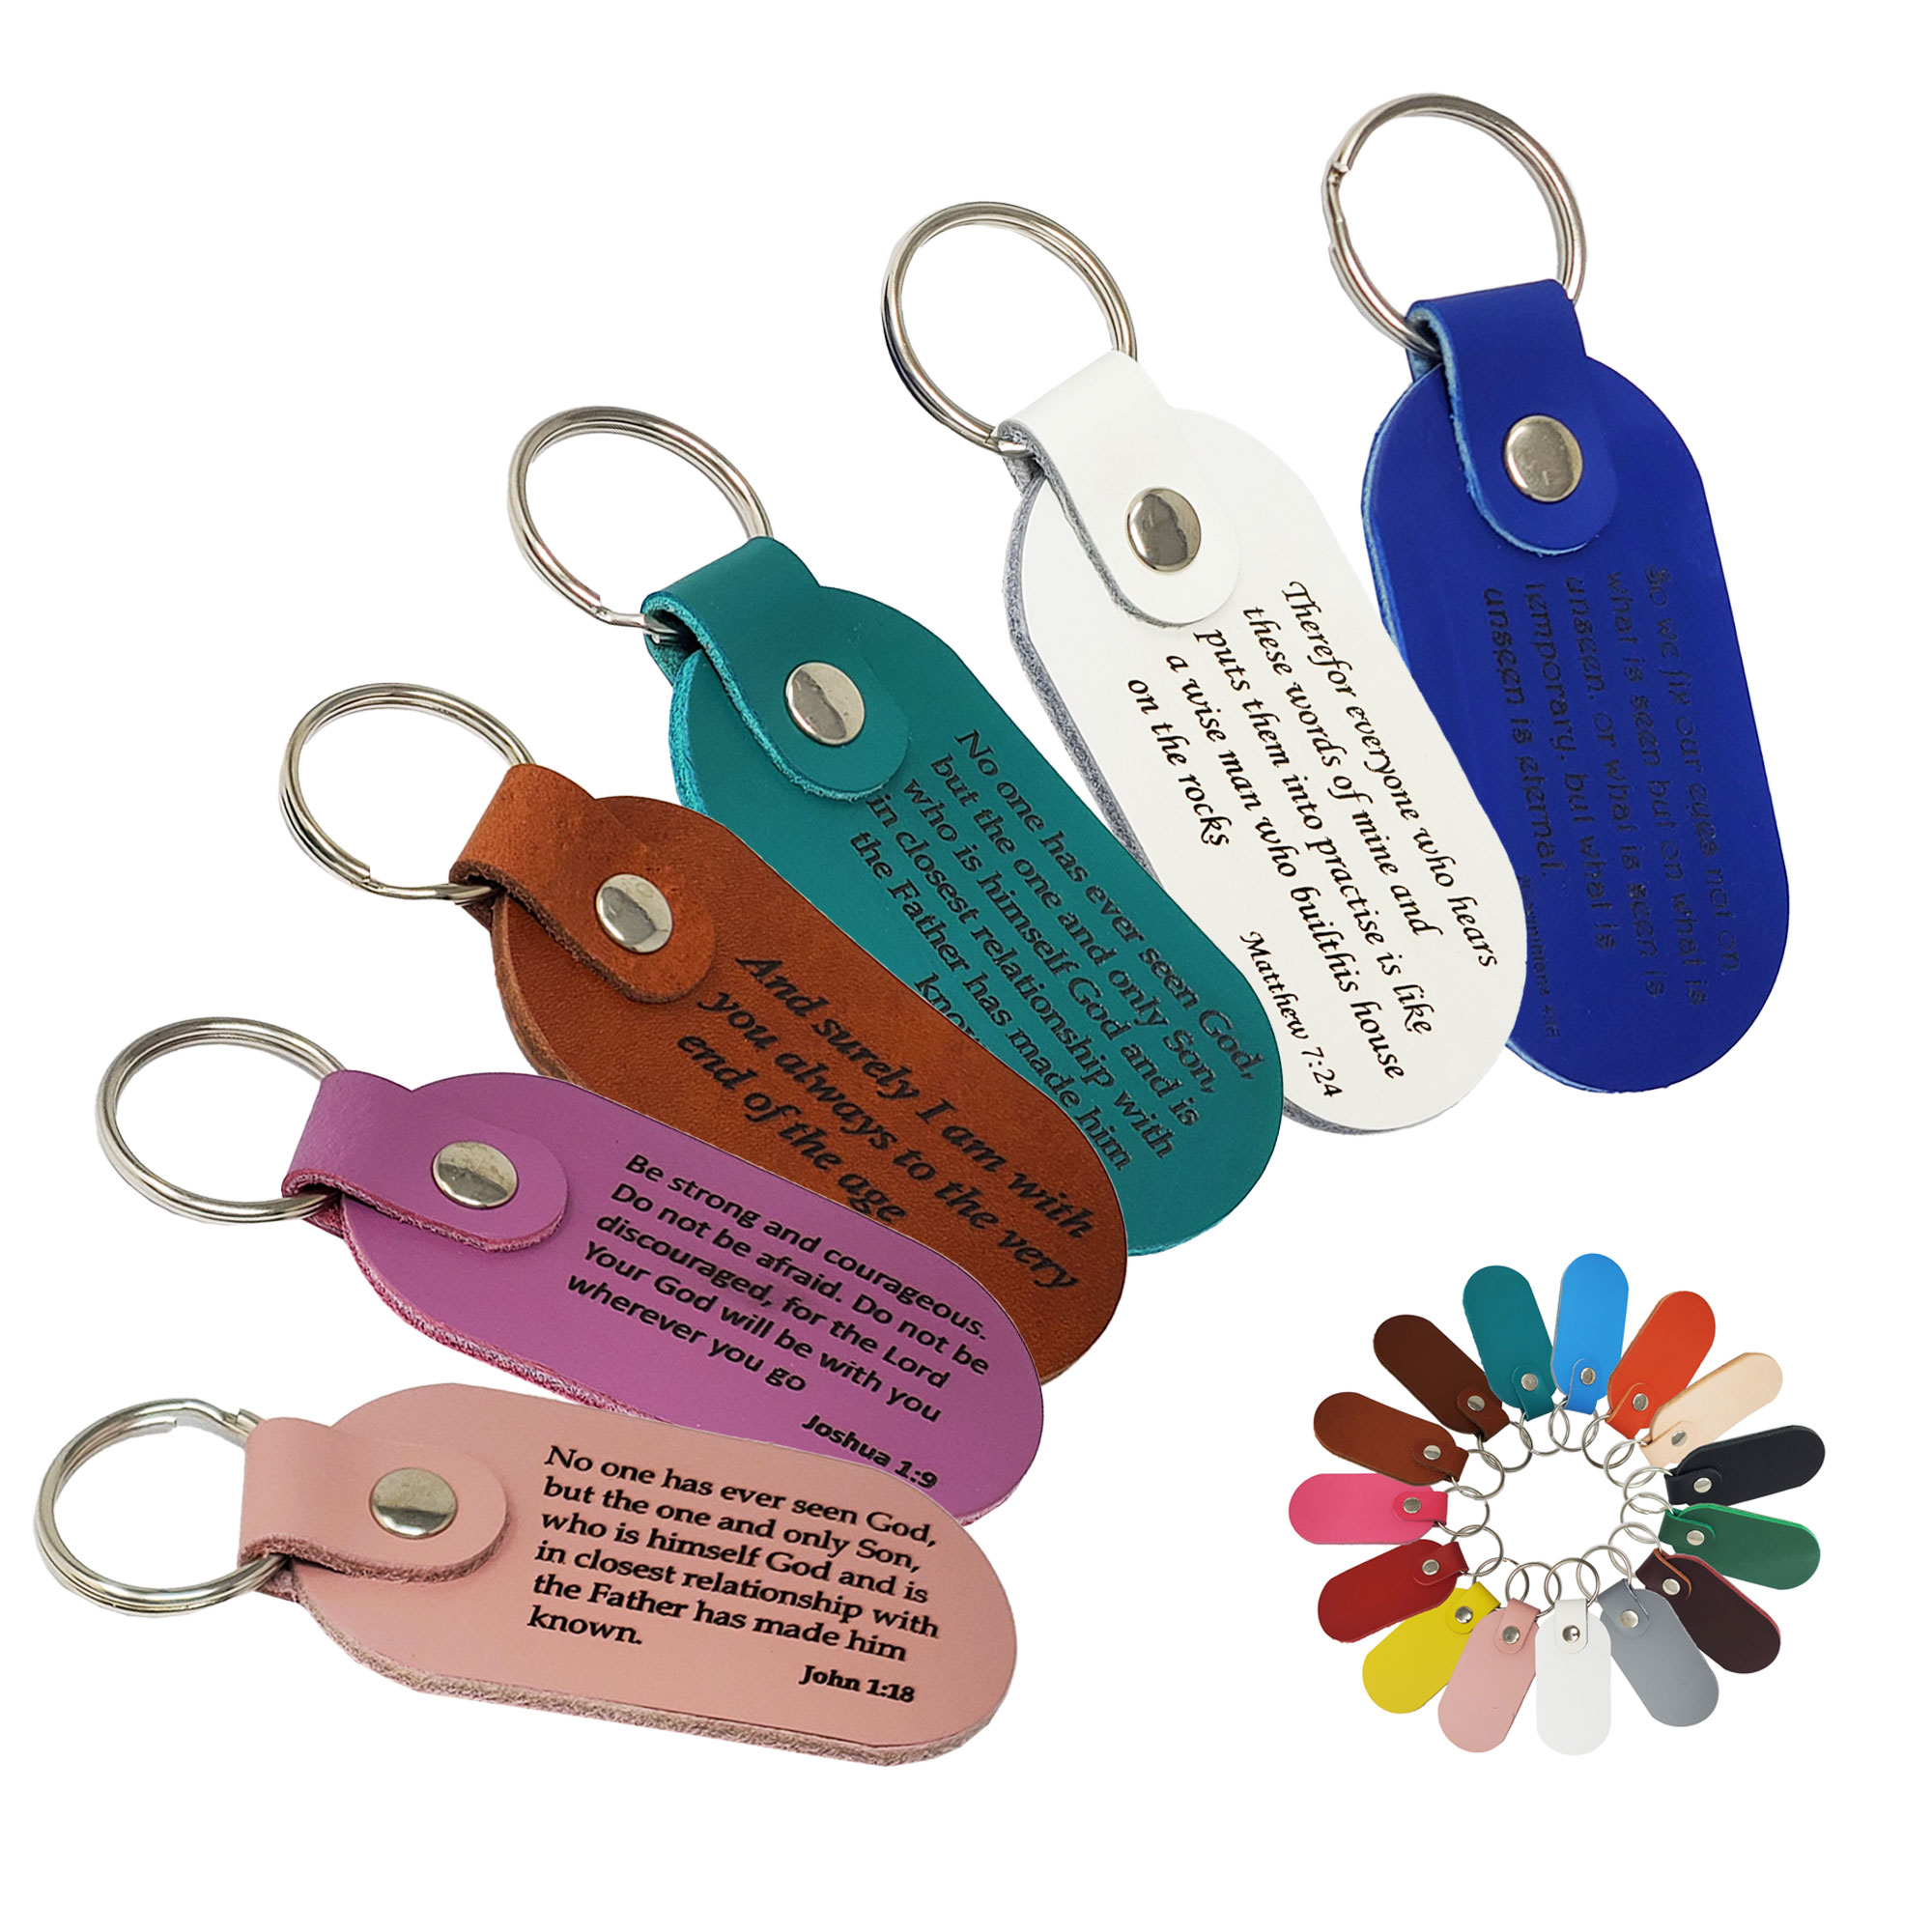 keychain blanks for leather laser engraving